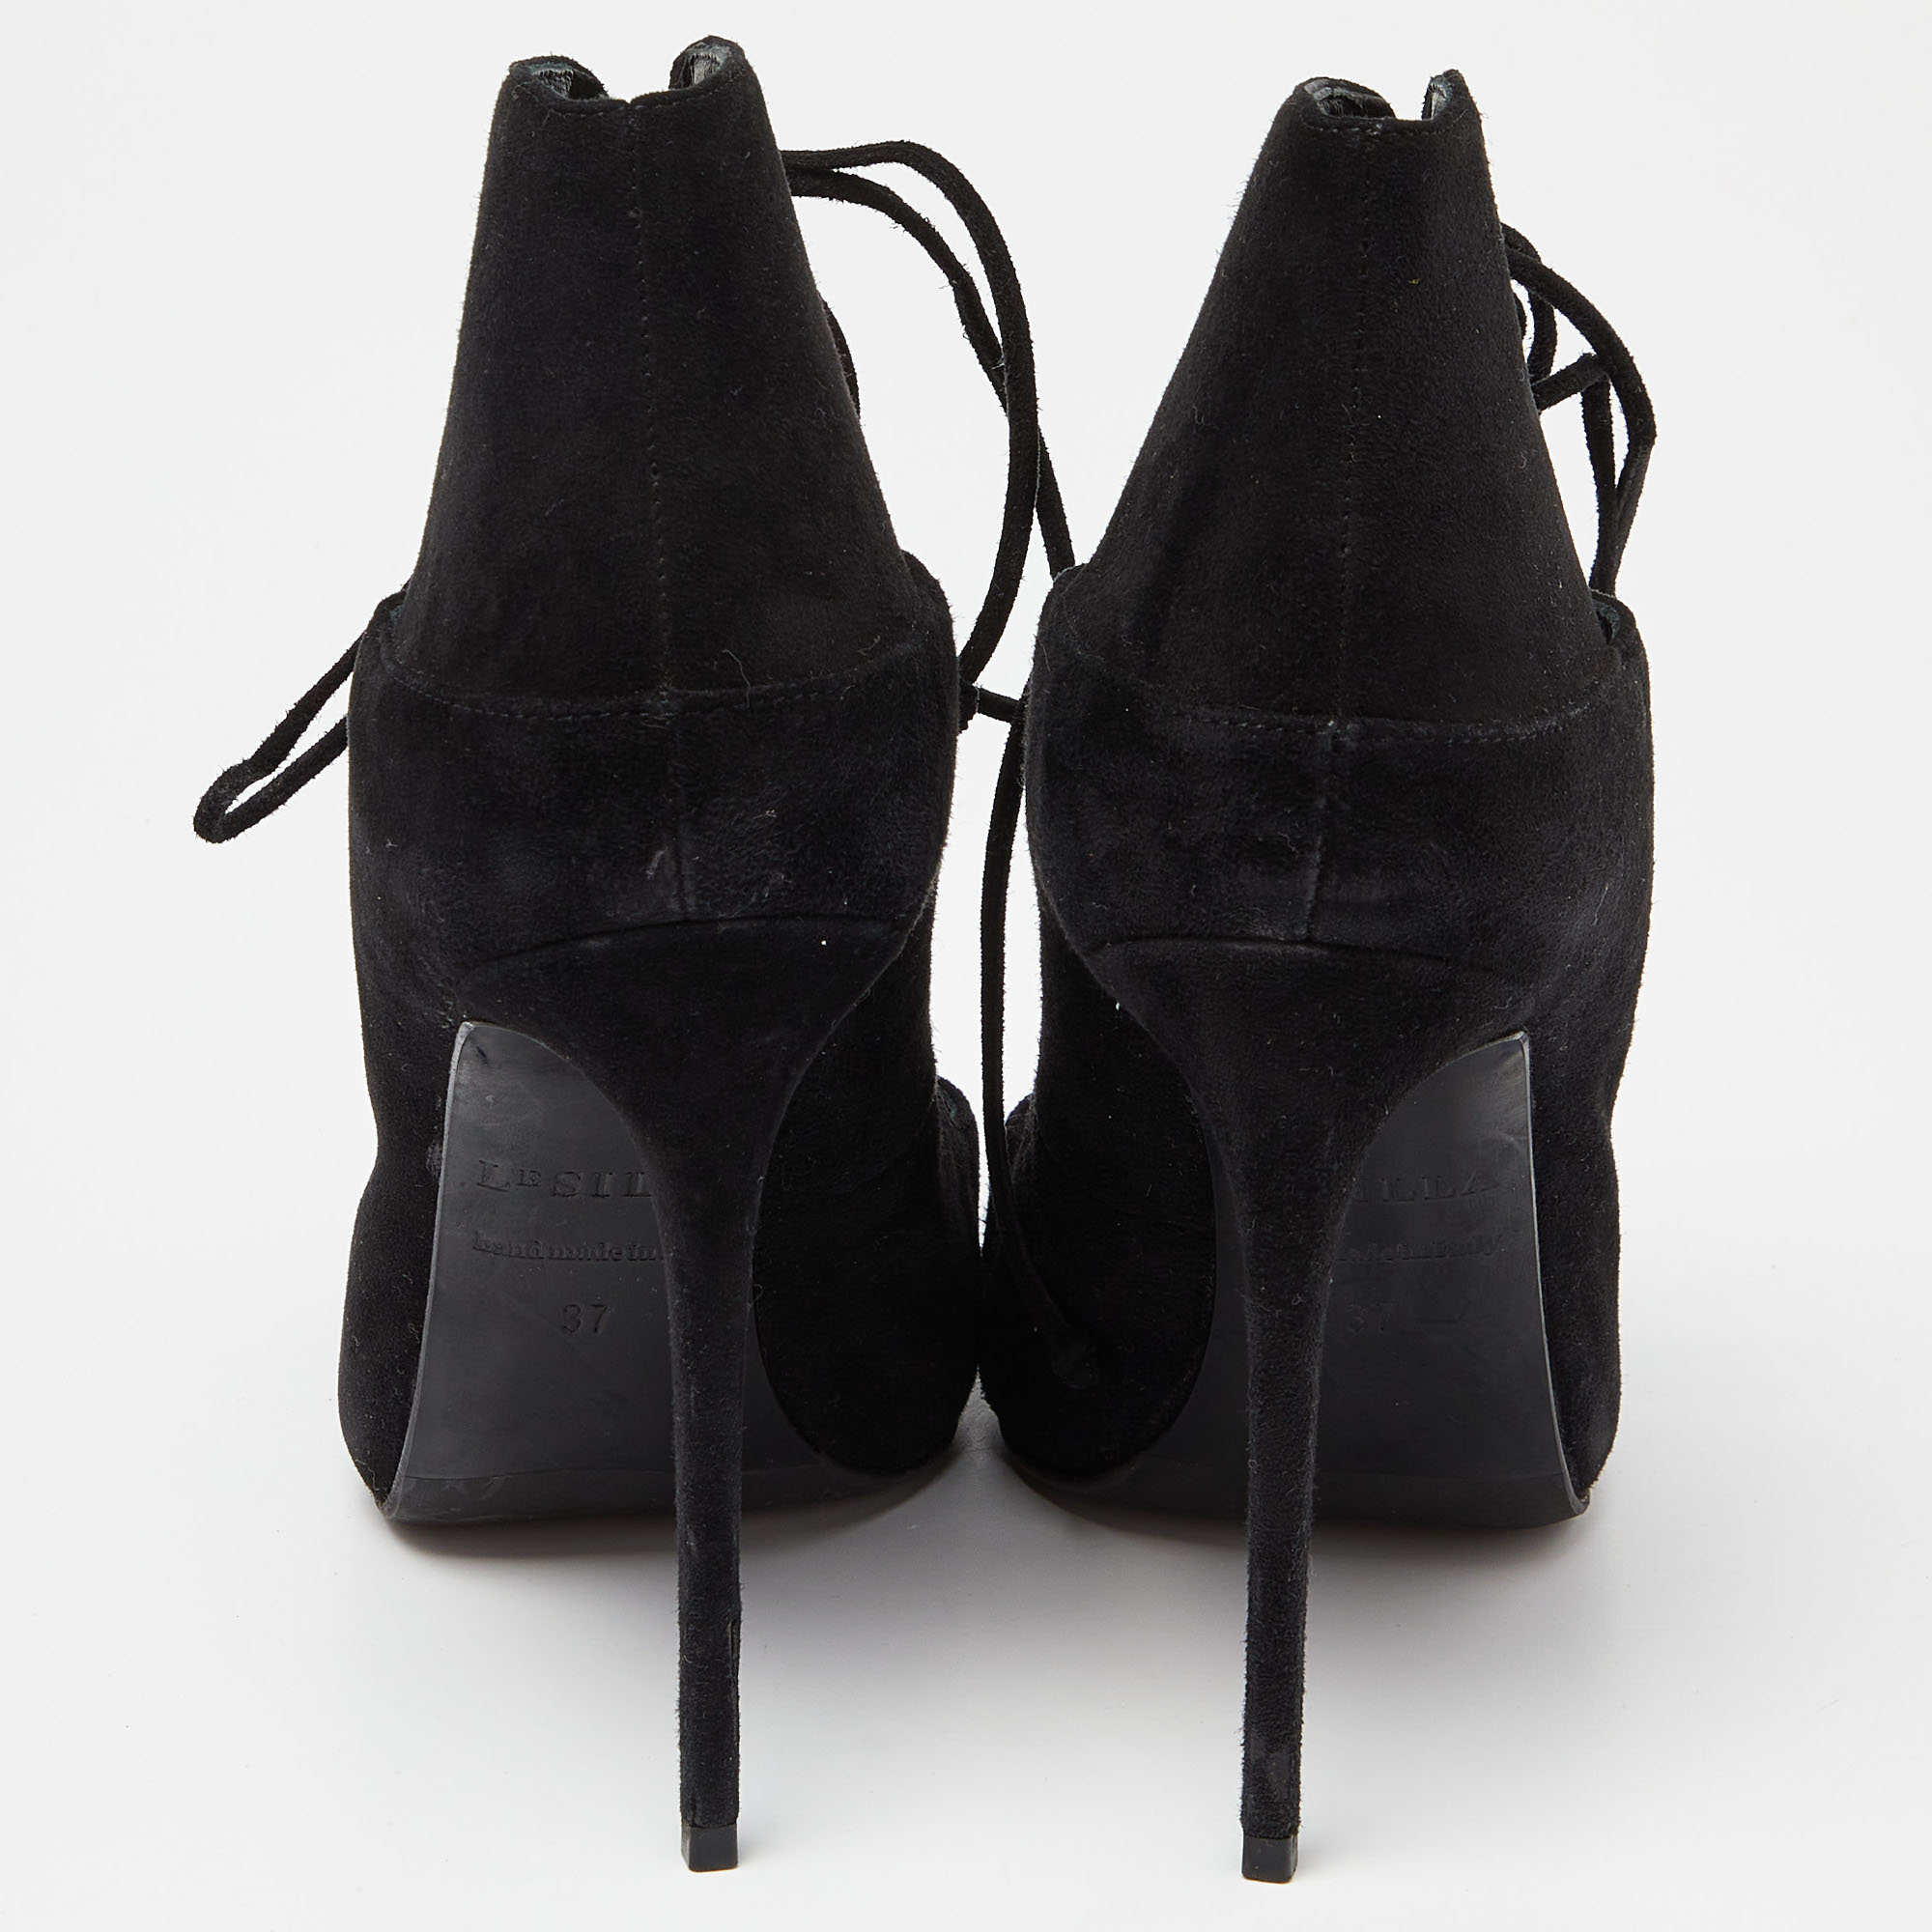 Le Silla Black Suede Lace Up Pointed Toe Ankle Booties 37